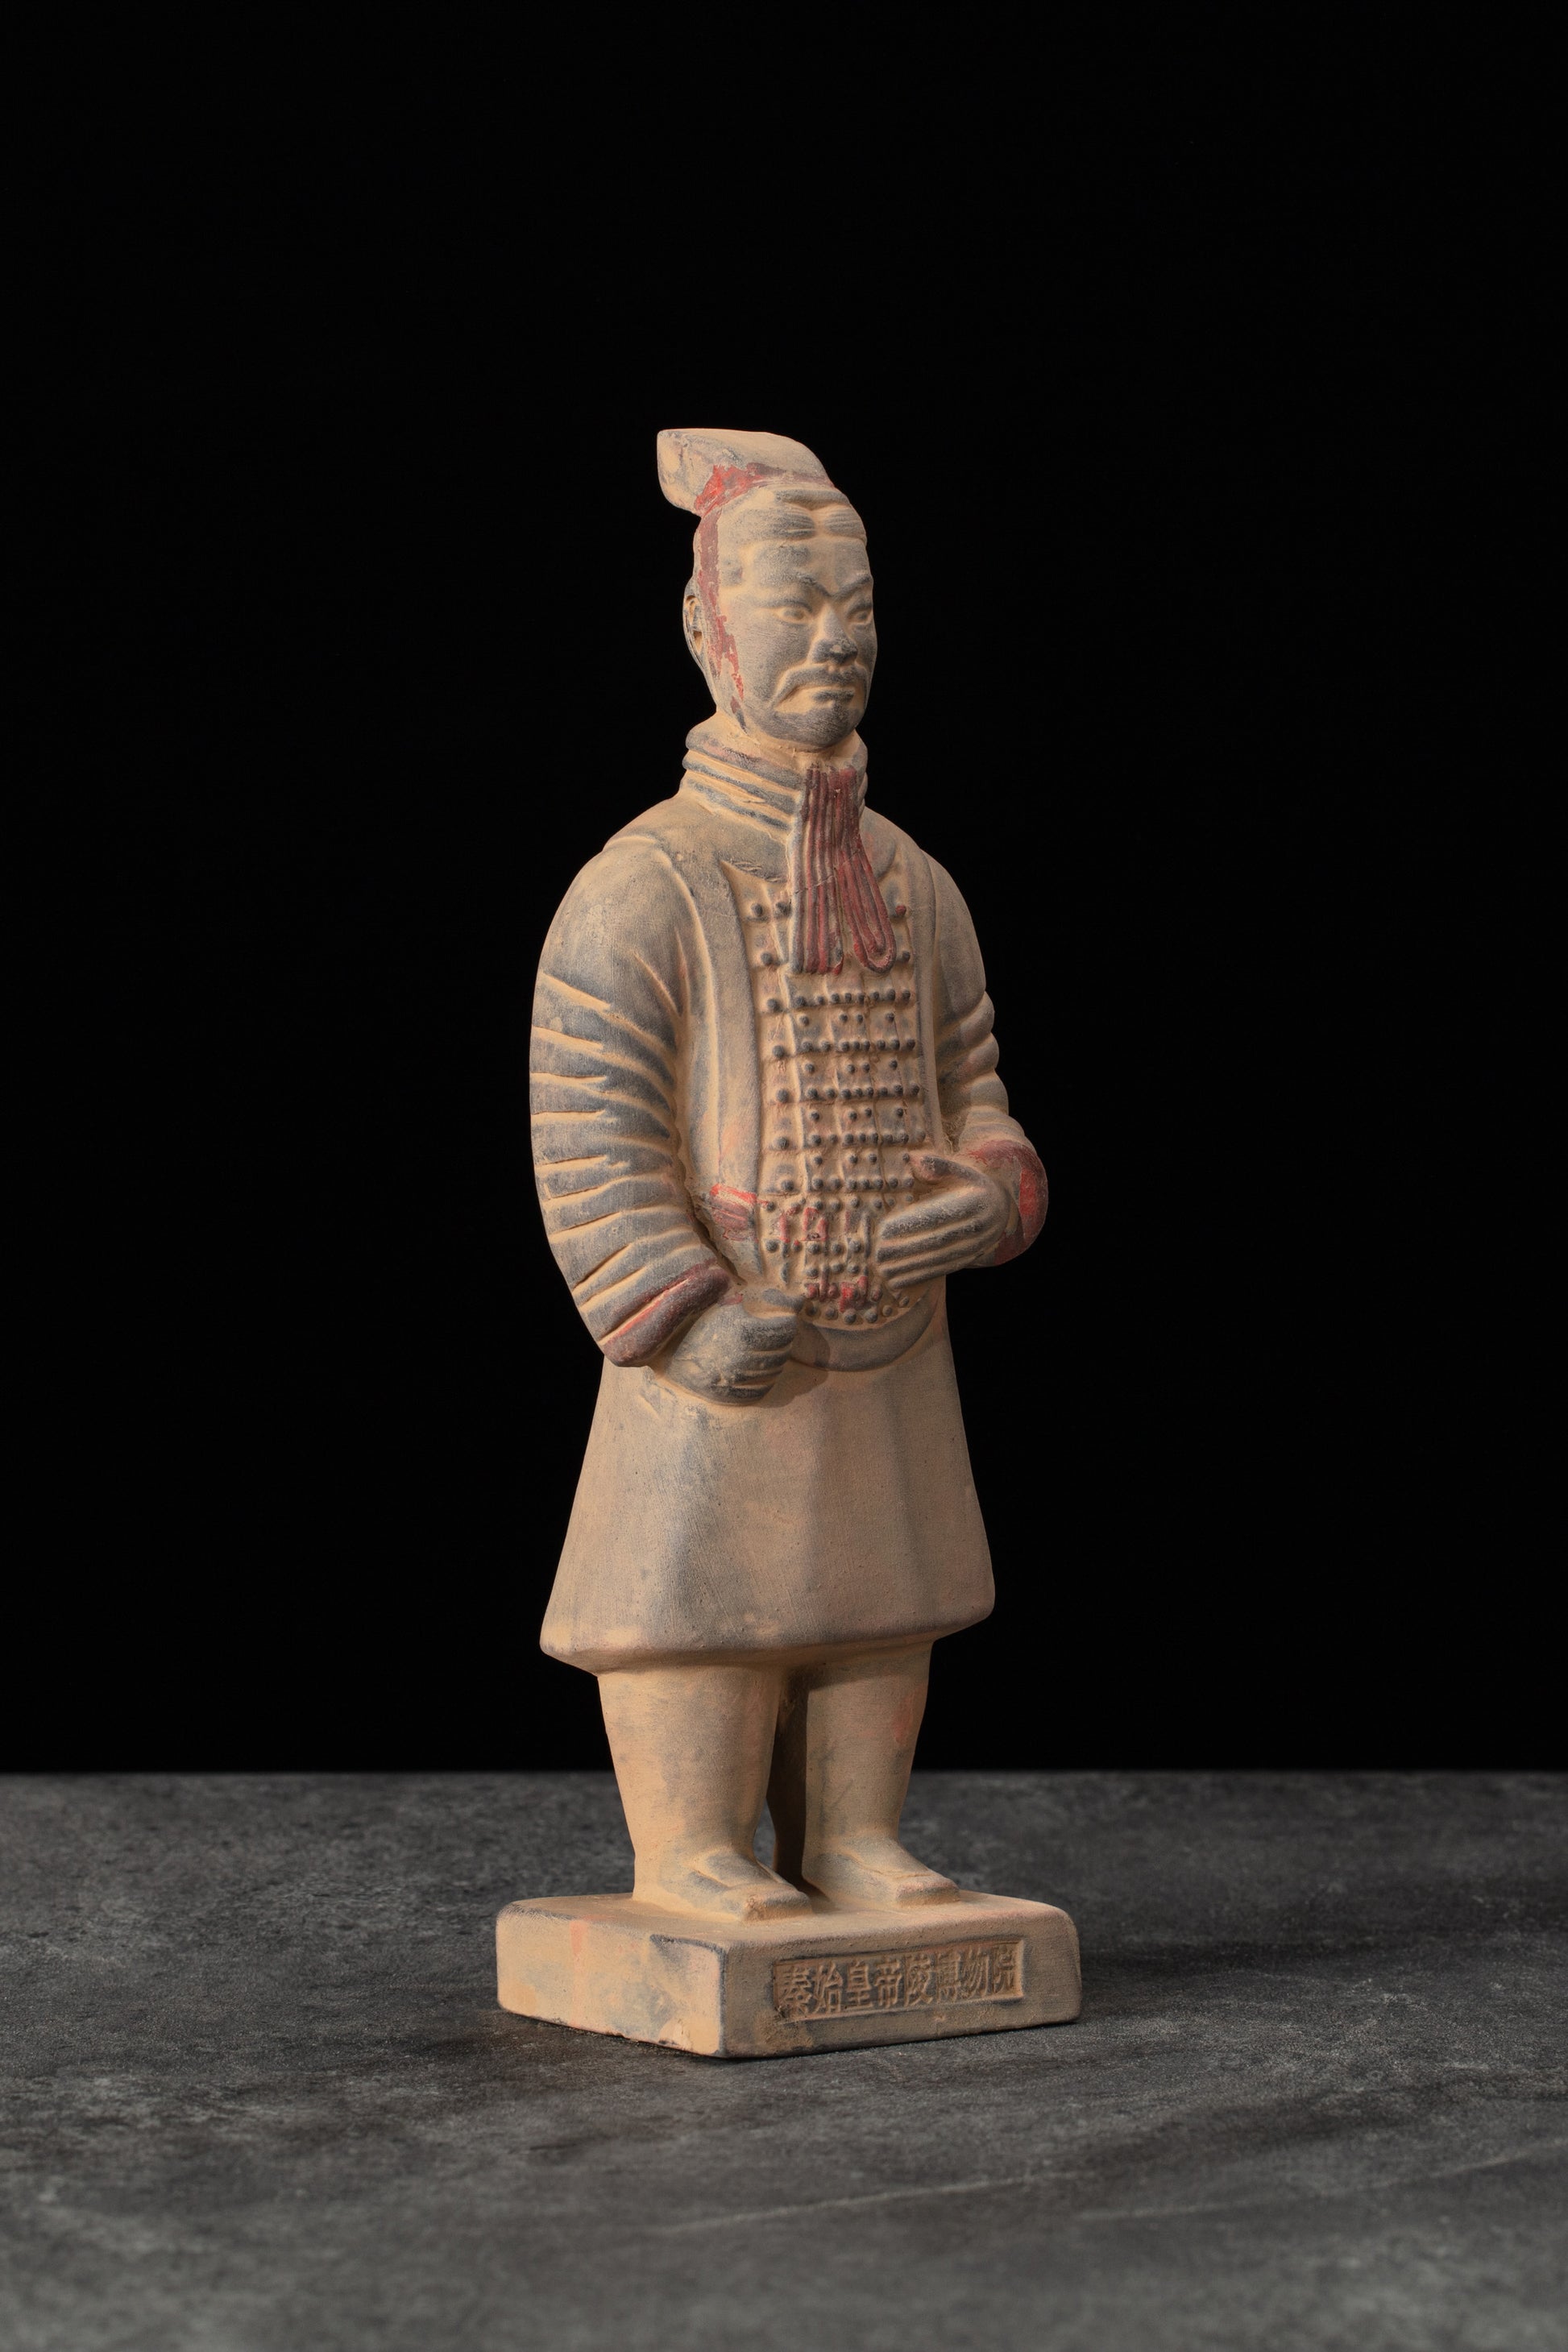 20CM Painted Officier - CLAYARMY-Side profile capturing the vibrant colors and intricate patterns of the 20CM Painted Officer's attire.